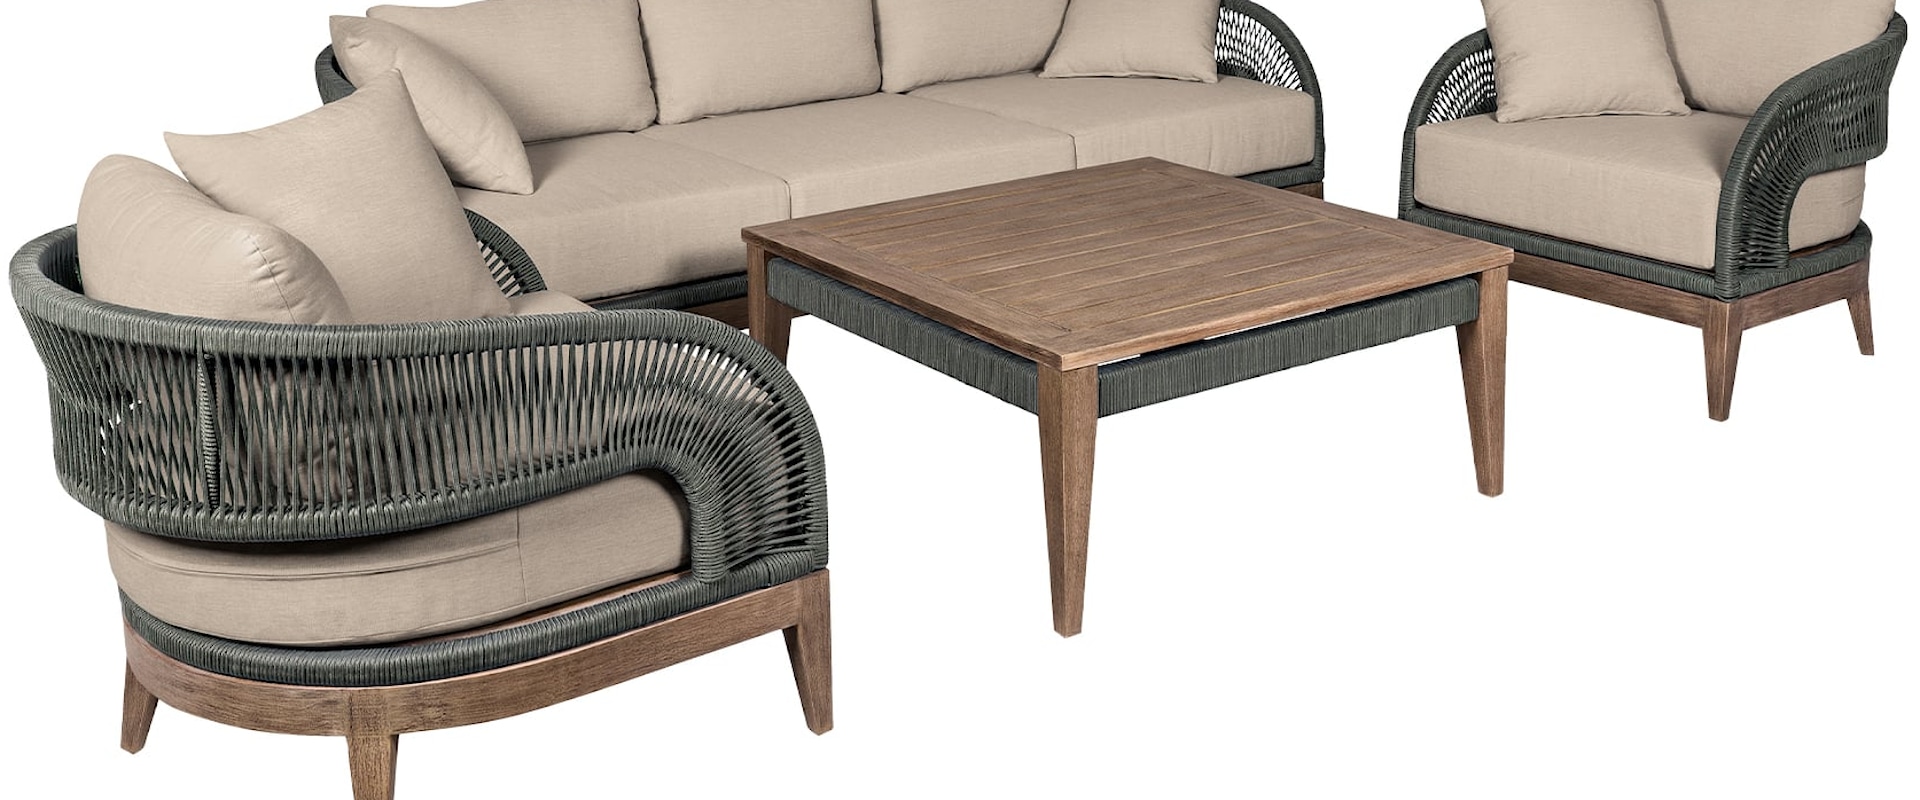 Contemporary Outdoor Conversation Set with Eucalyptus Wood and Rope Accents